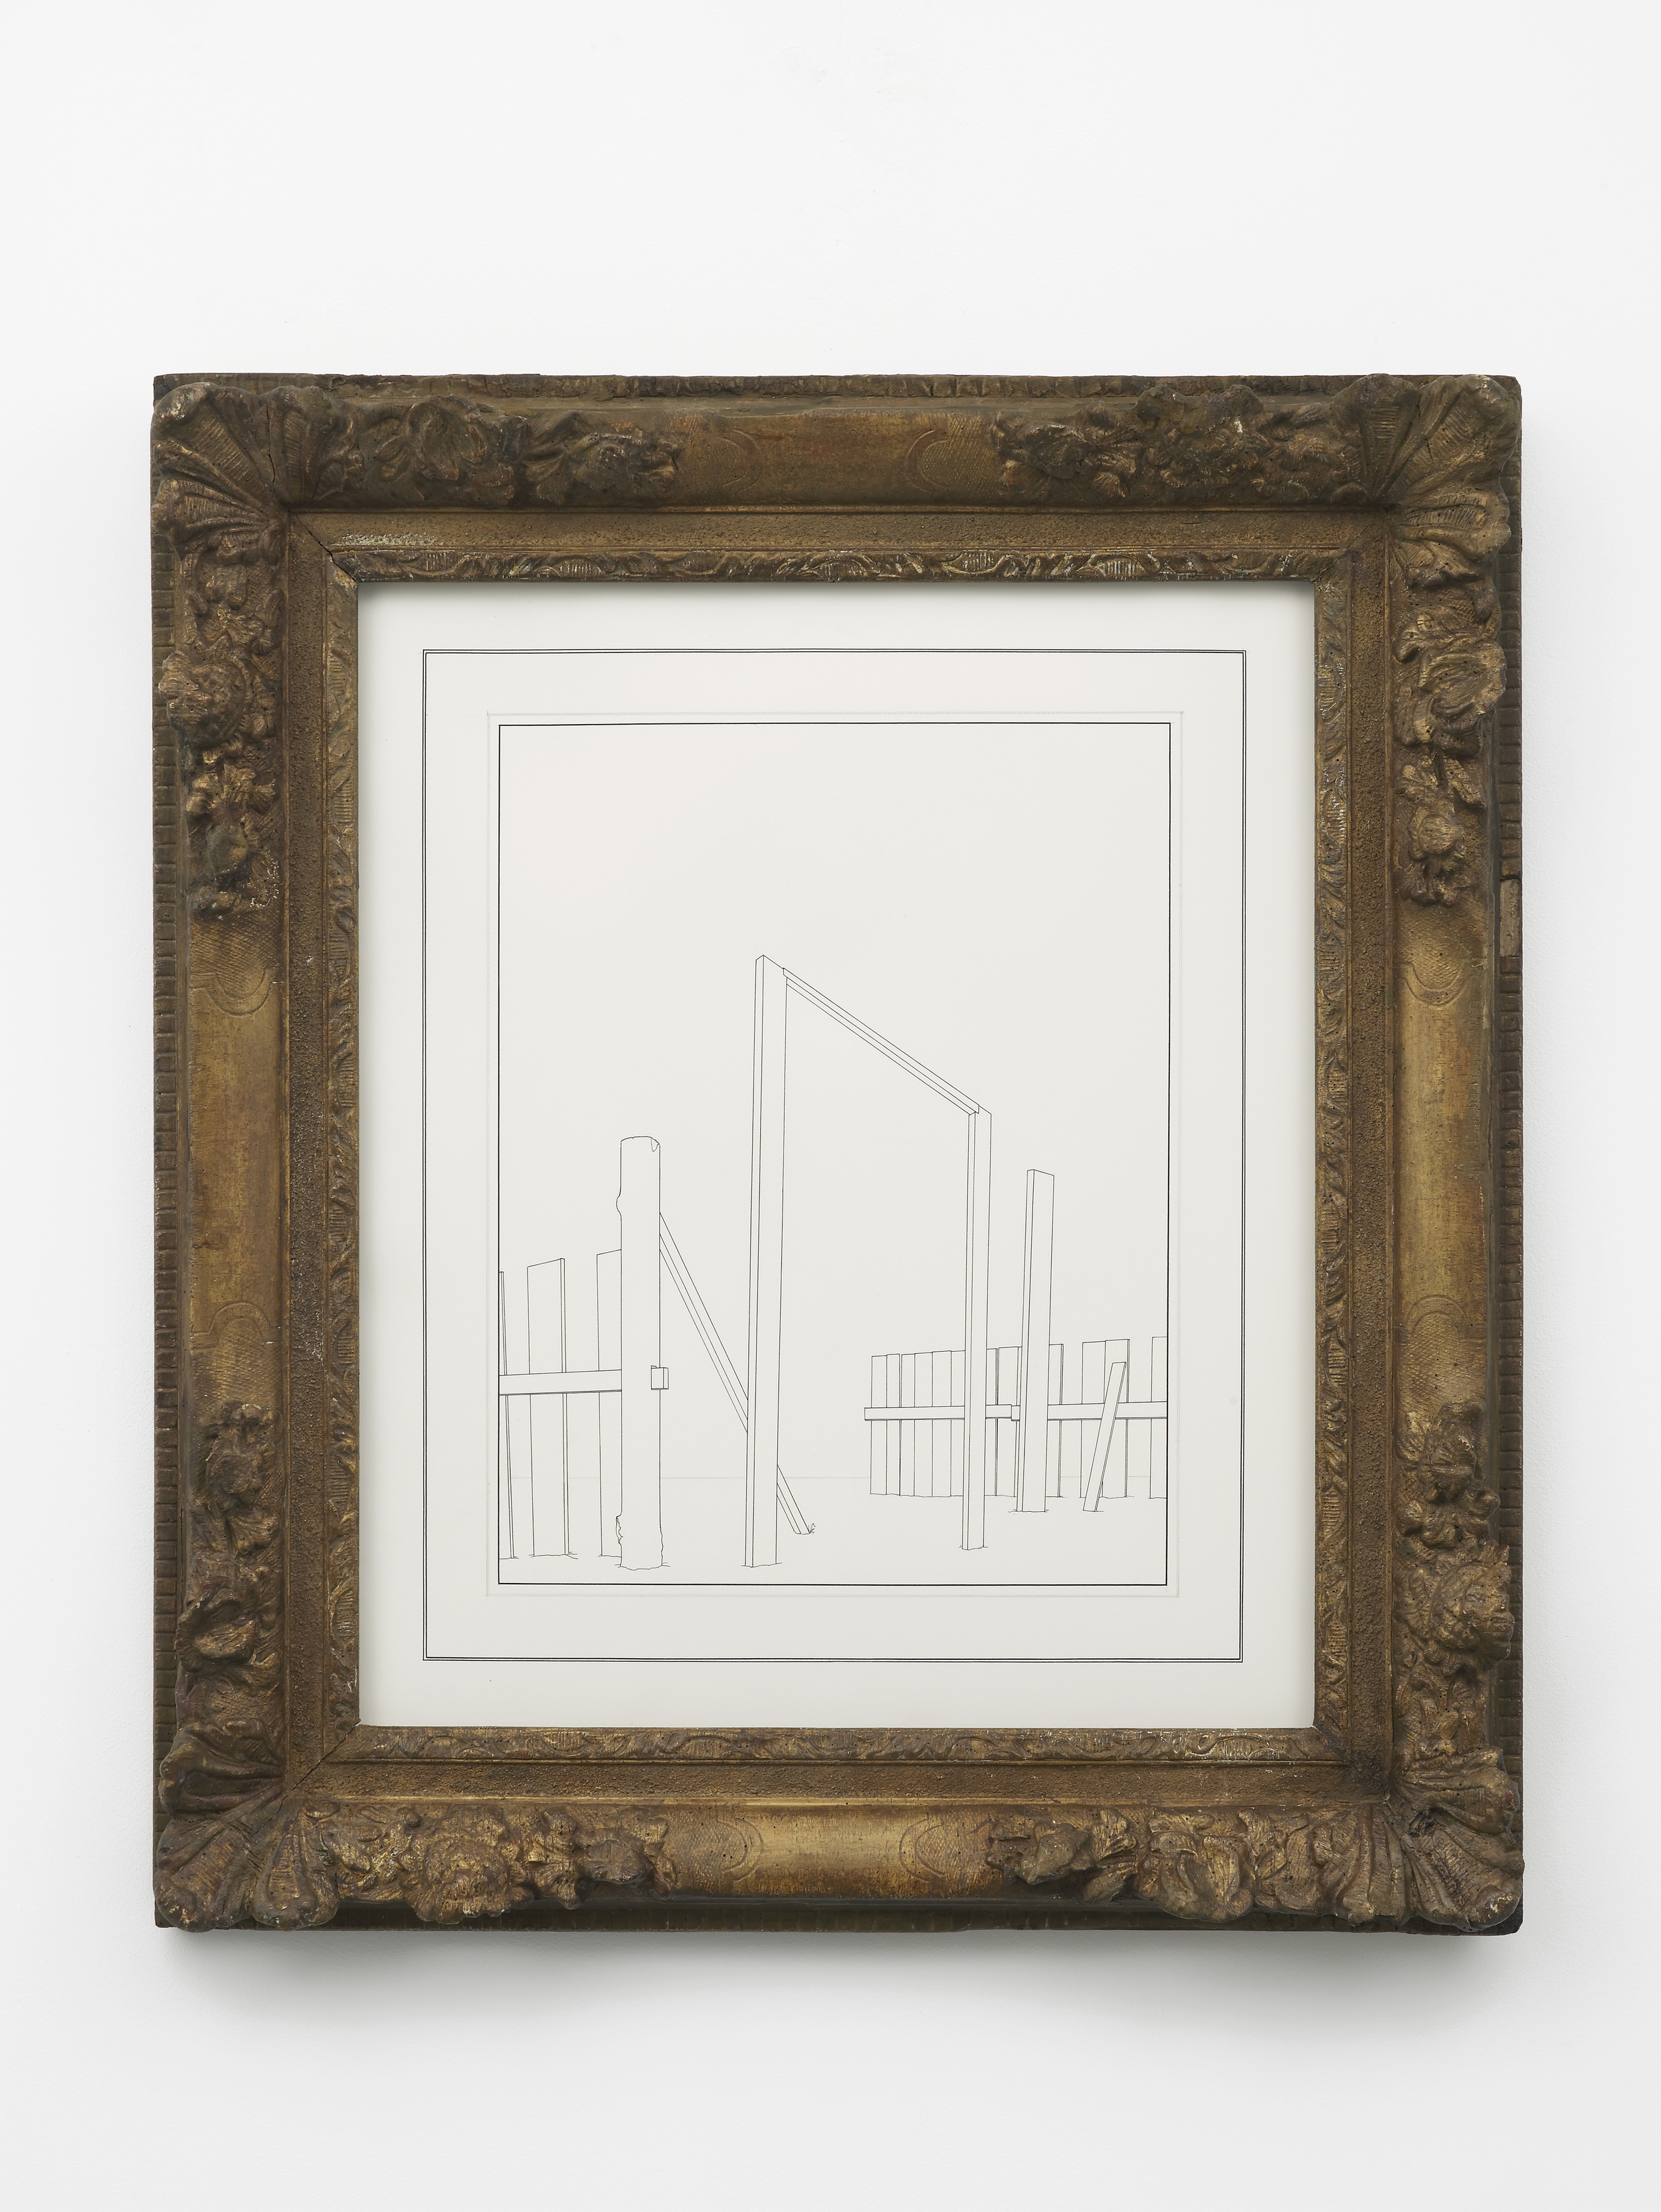     House under Construction 2014 Ink and graphite on paper in artist’s frame 80.5 x 71 x 8.5 cm / 31.6 x 27.9 x 3.3 in 